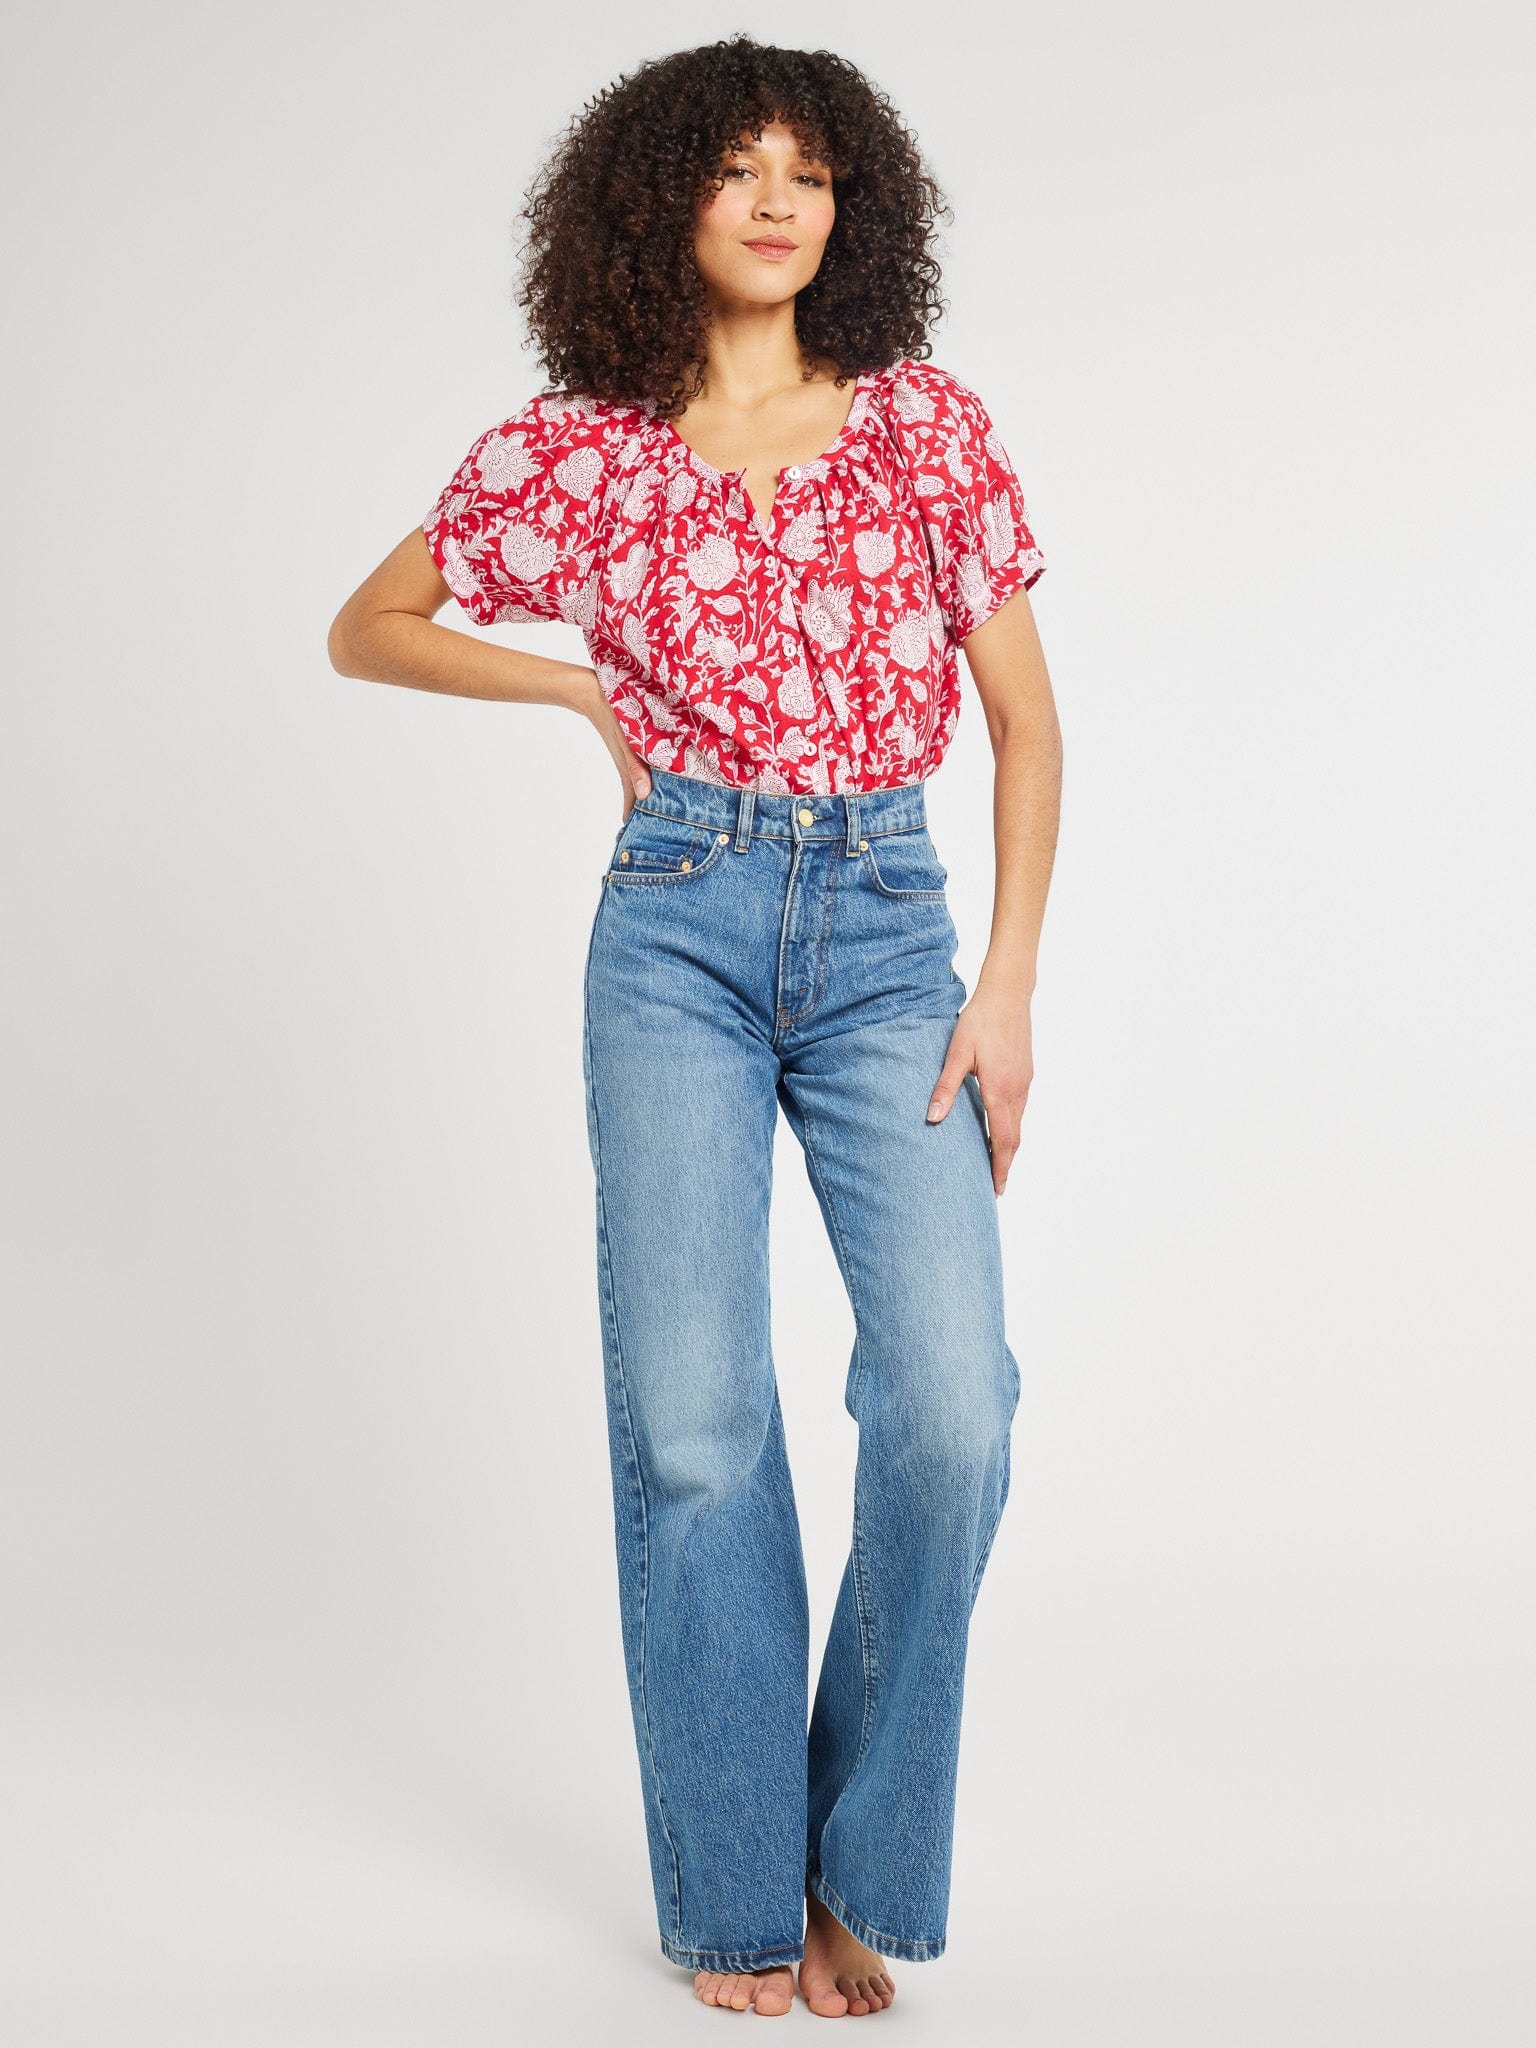 MILLE Clothing Naomi Top in Red Zinnia